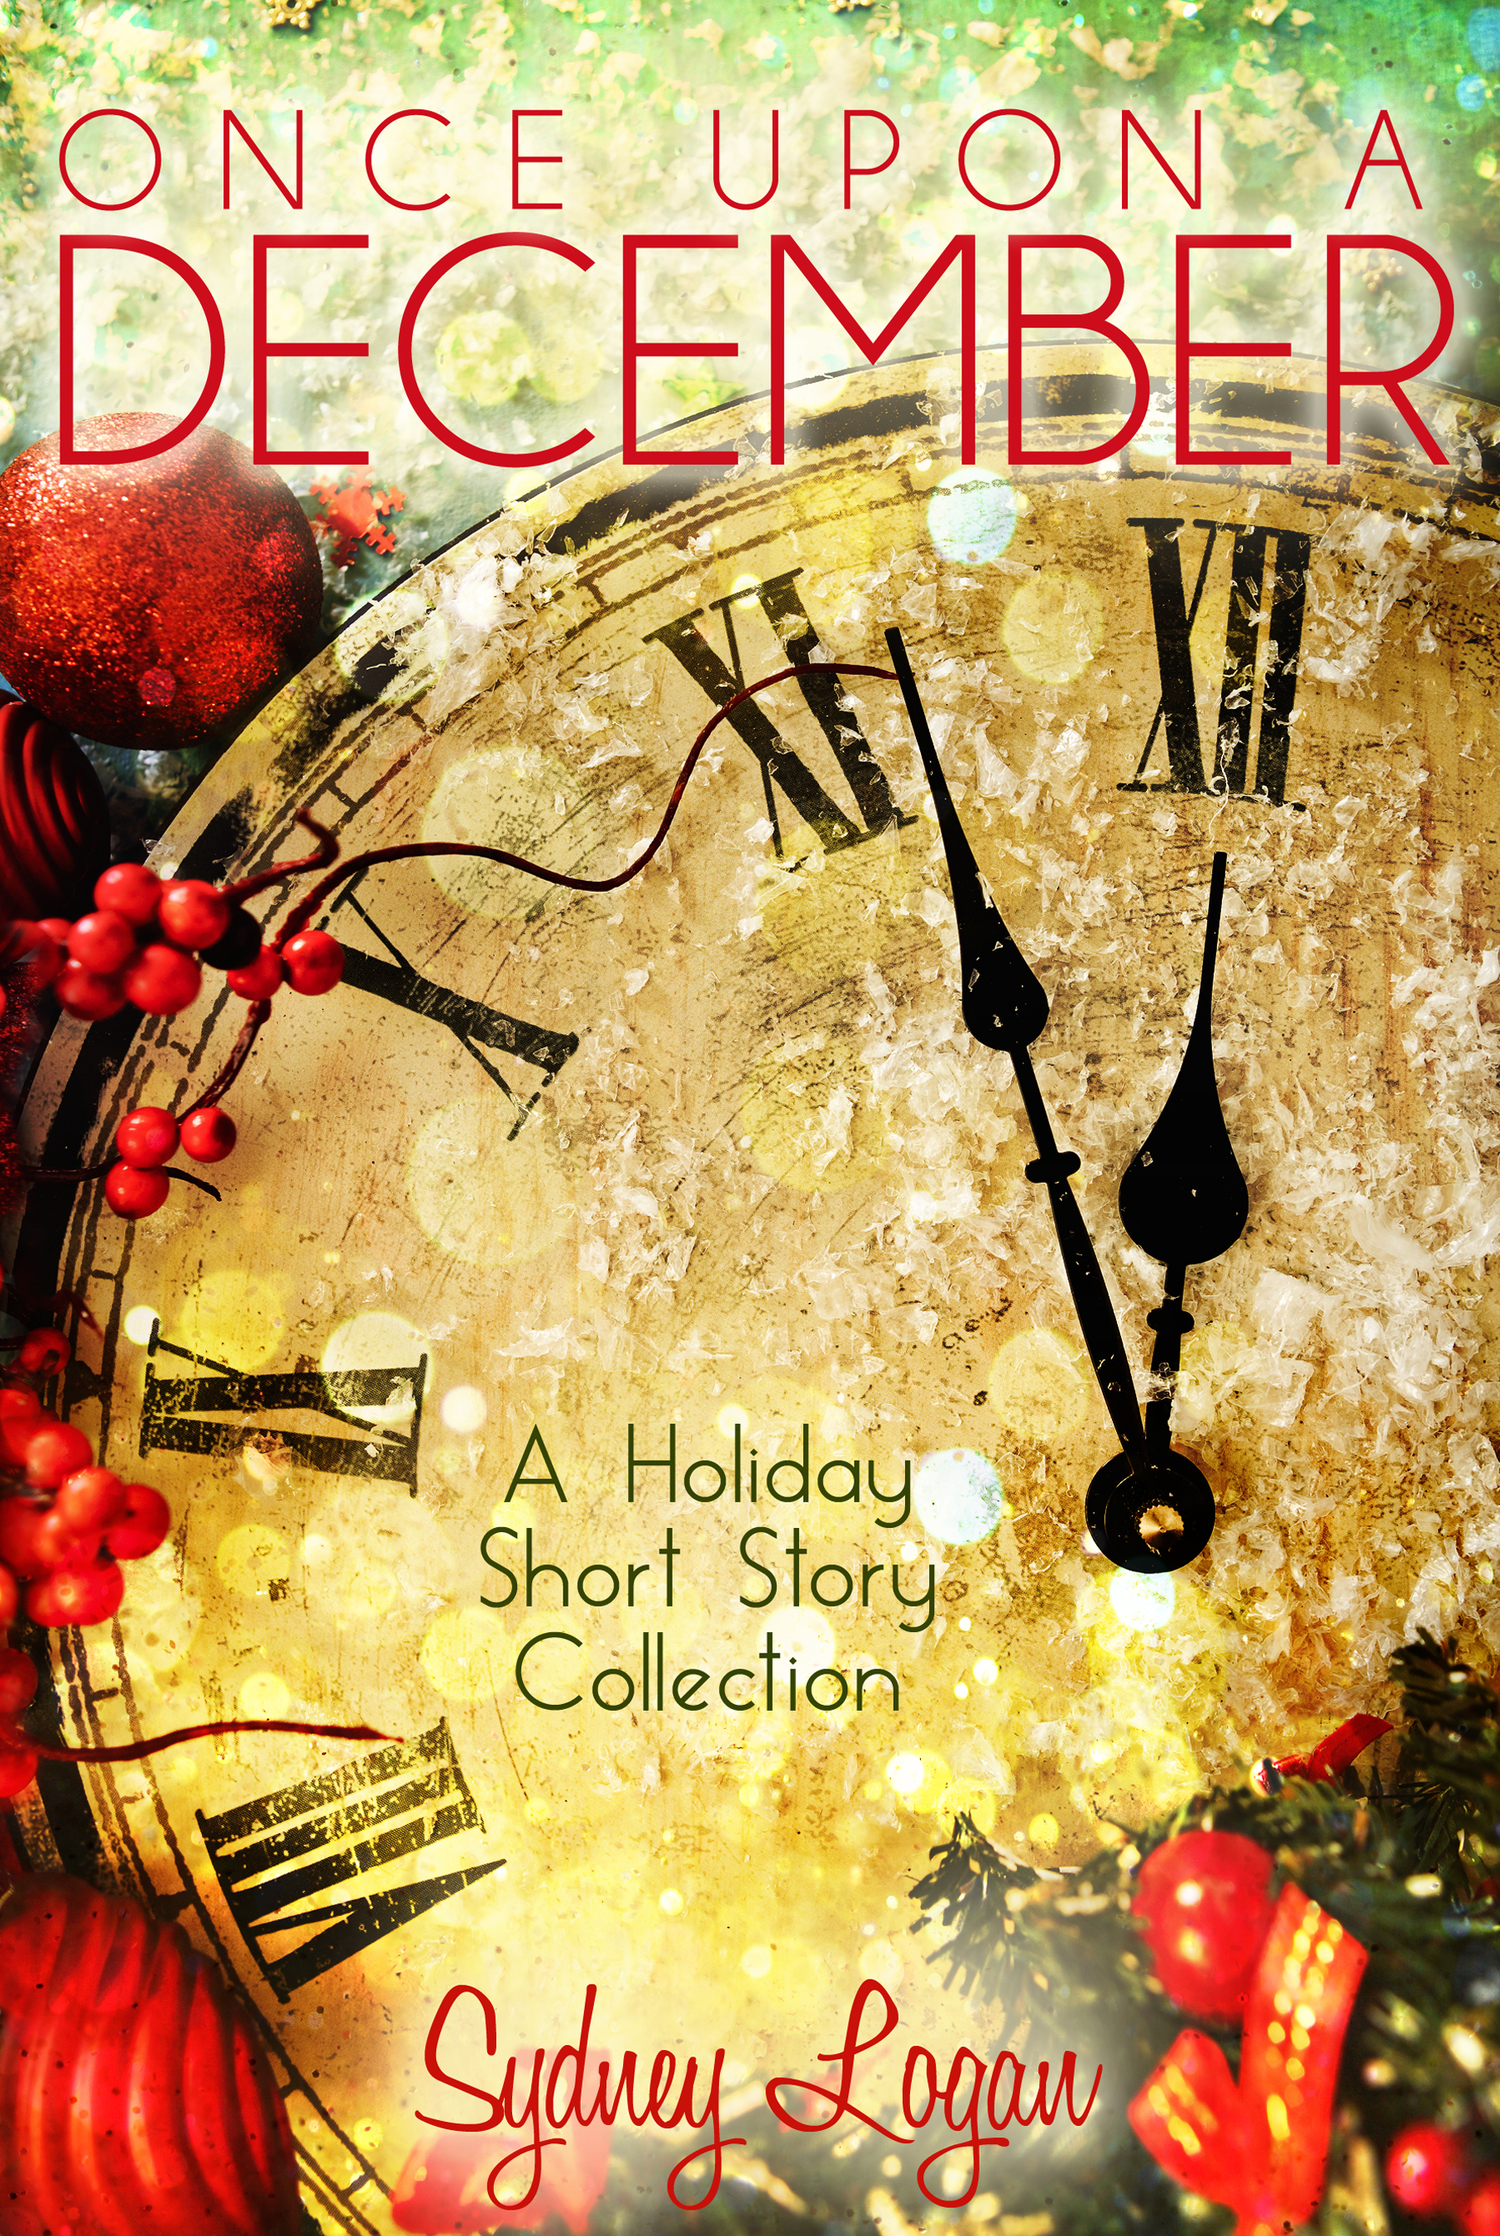 Once upon a December. Book a Holiday. Always, in December book goodreads. A short holiday